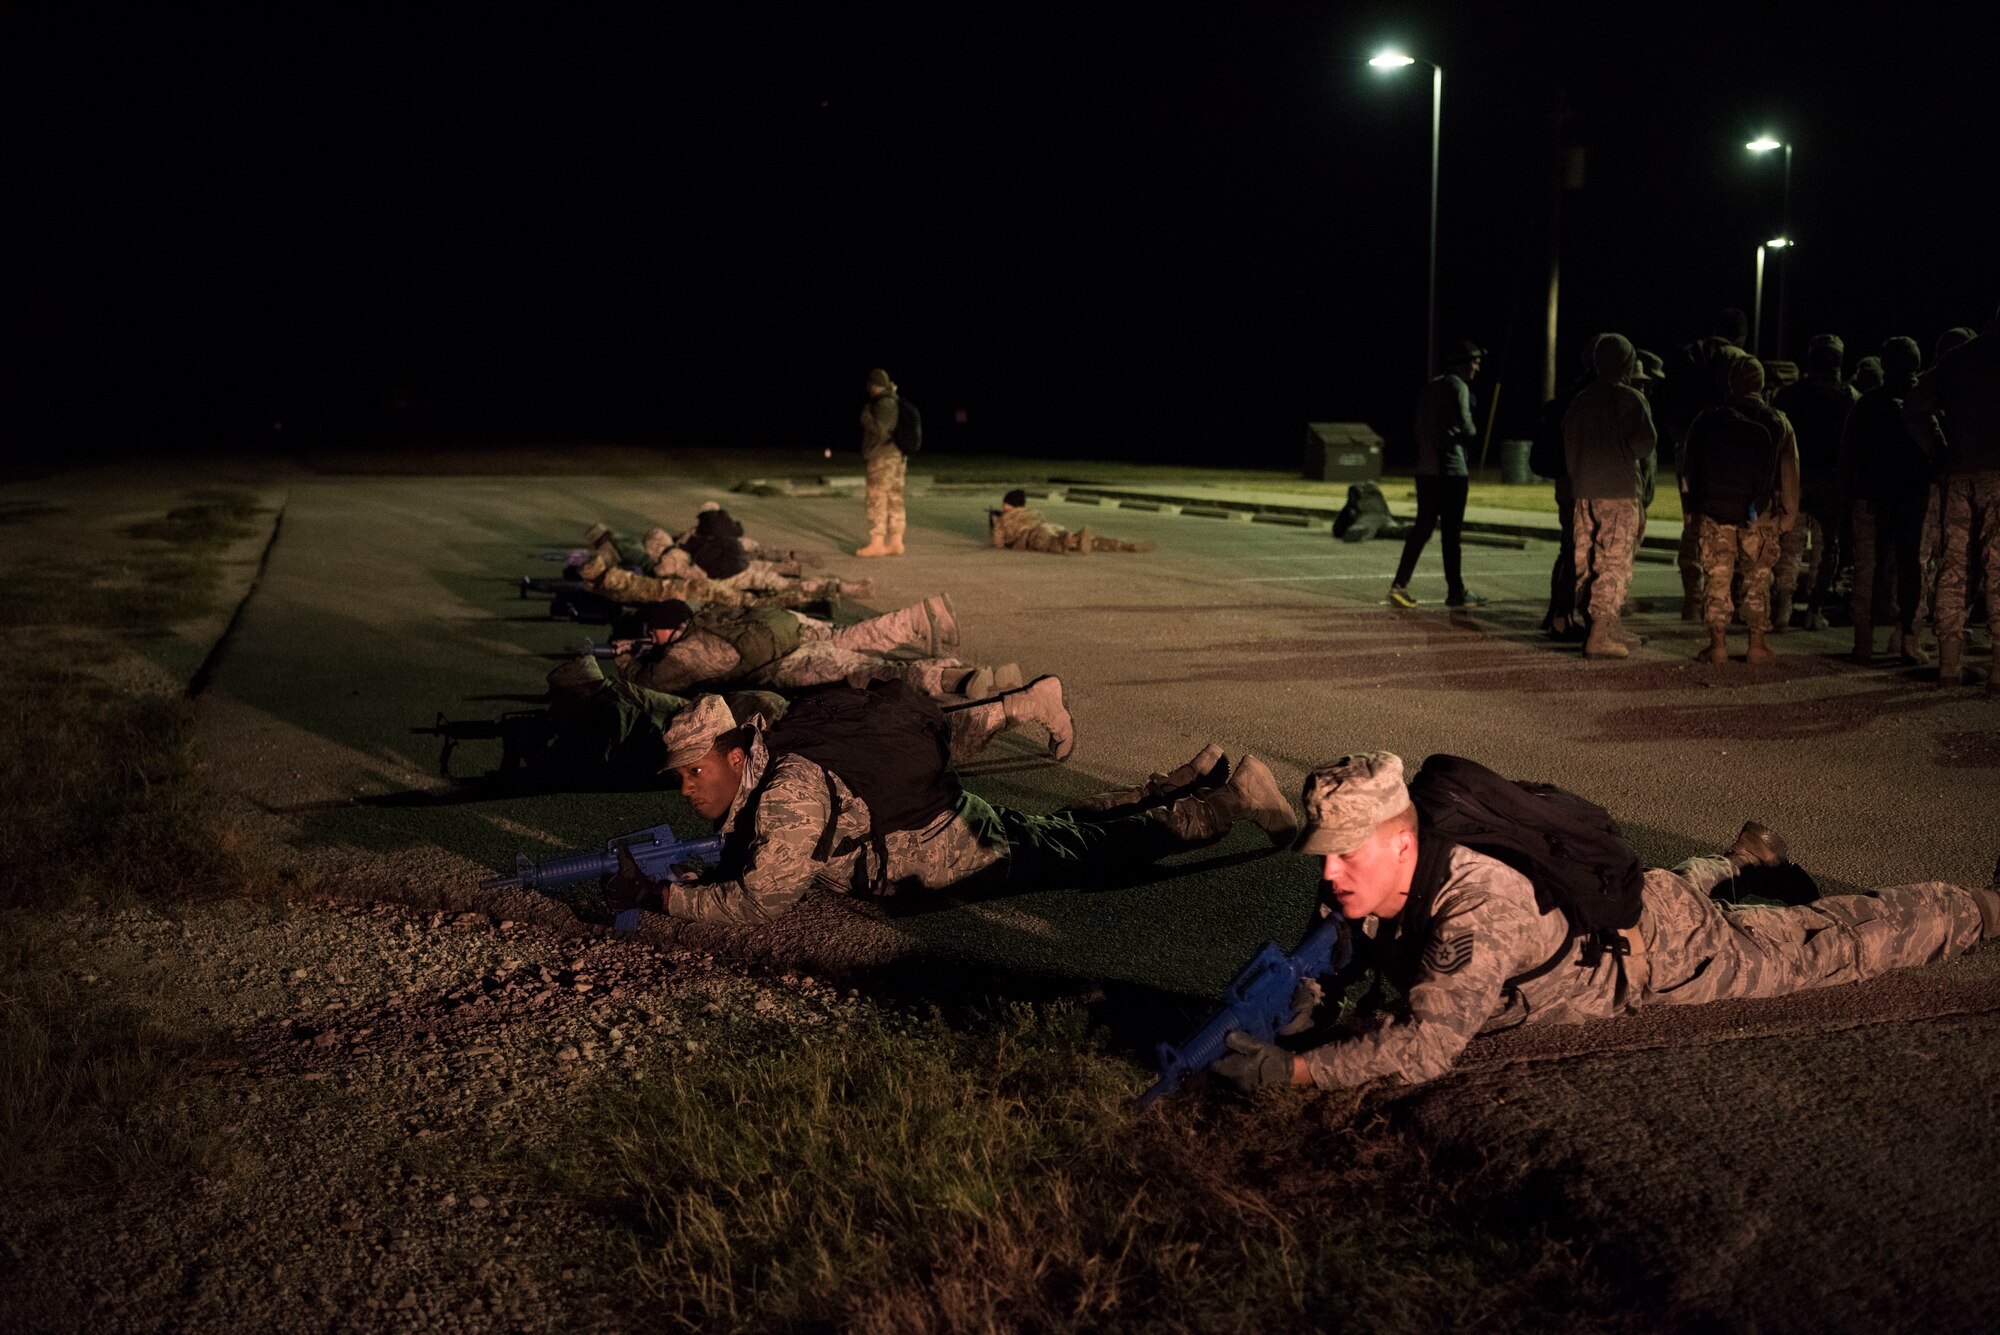 Airmen assigned to the 47th Medical Group lay in a formation to protect against adversaries in an exercise at Laughlin Air Force Base, Texas, Oct. 25, 2019. One aspect the team trained on was setting up 360 degree perimeter security to protect anyone giving medical care from adversaries. (U.S. Air Force photo by Senior Airman Marco A. Gomez)